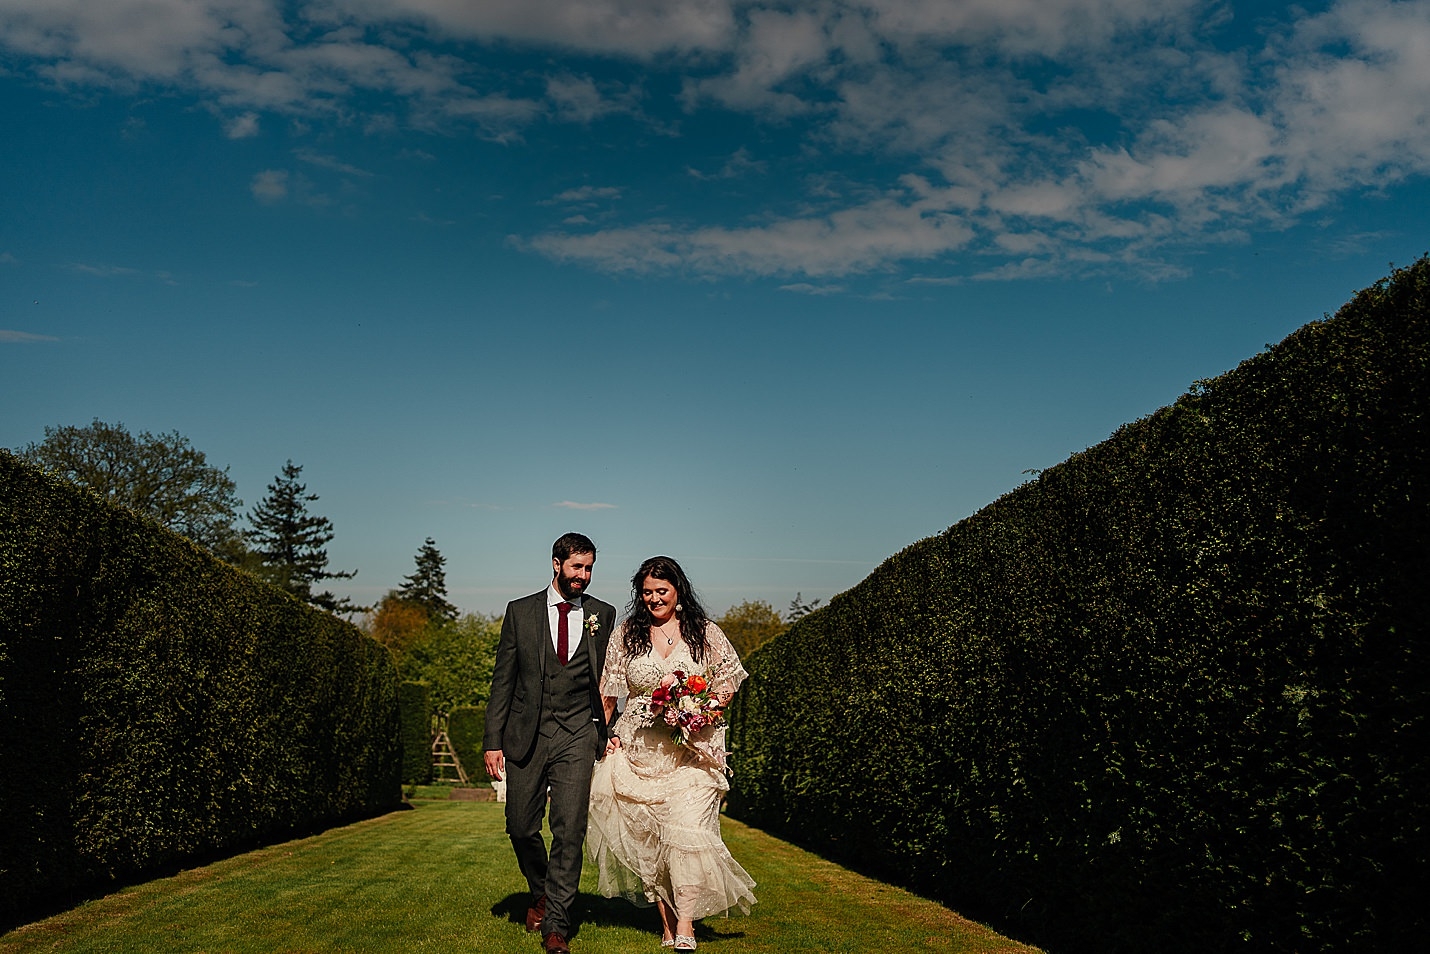 A colourful, nature-filled wedding at Drum Castle